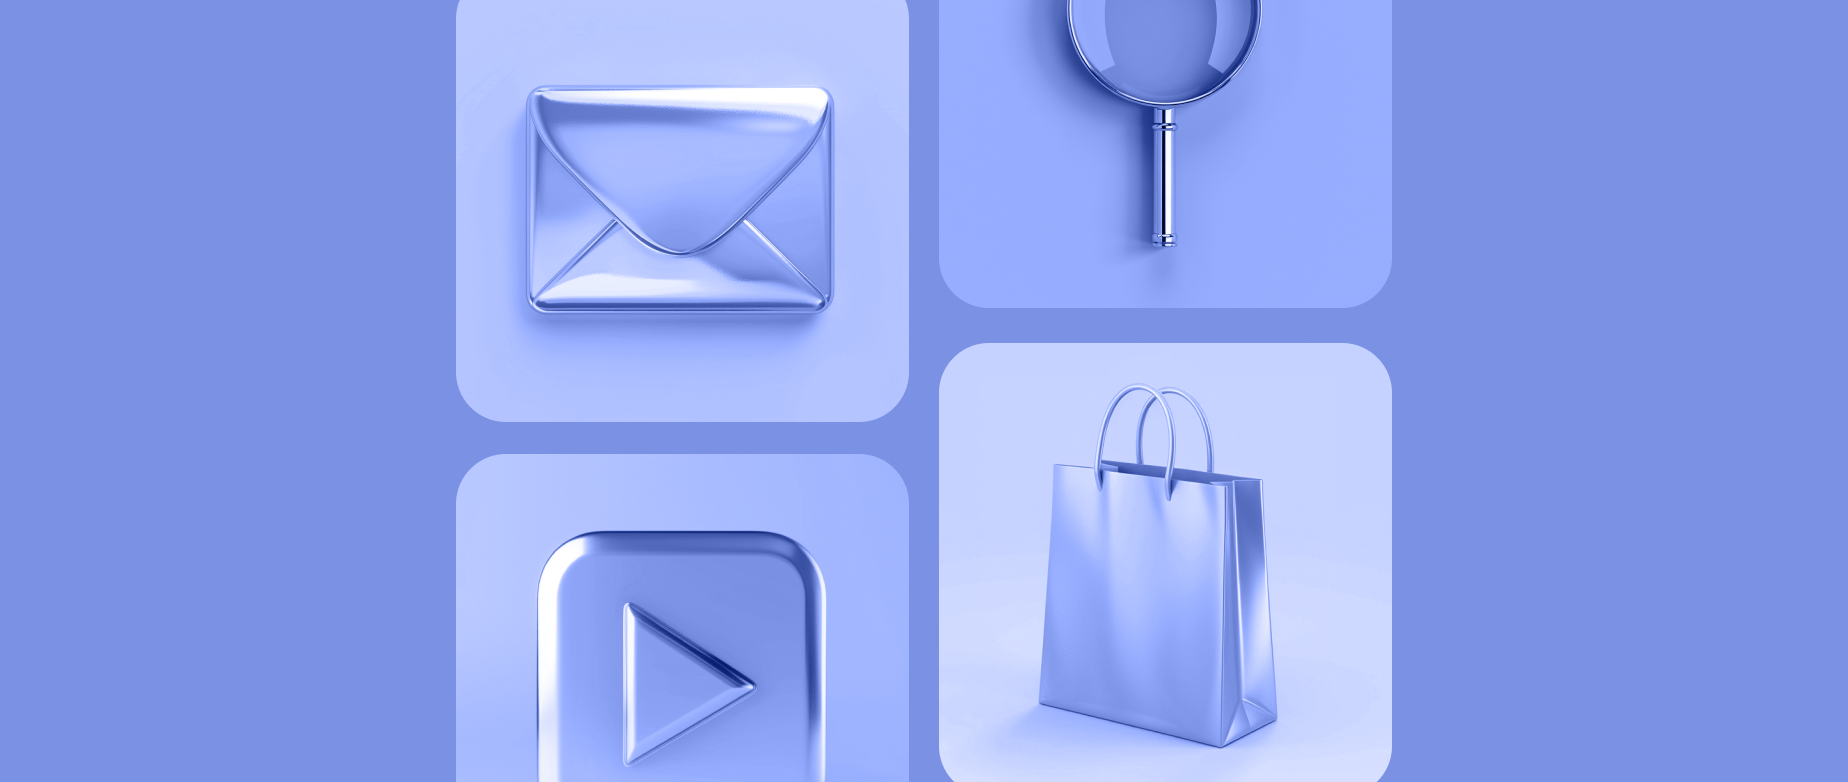 Icons with envelopes, video, shopping bag, and magnifying glass on a blue purple background.